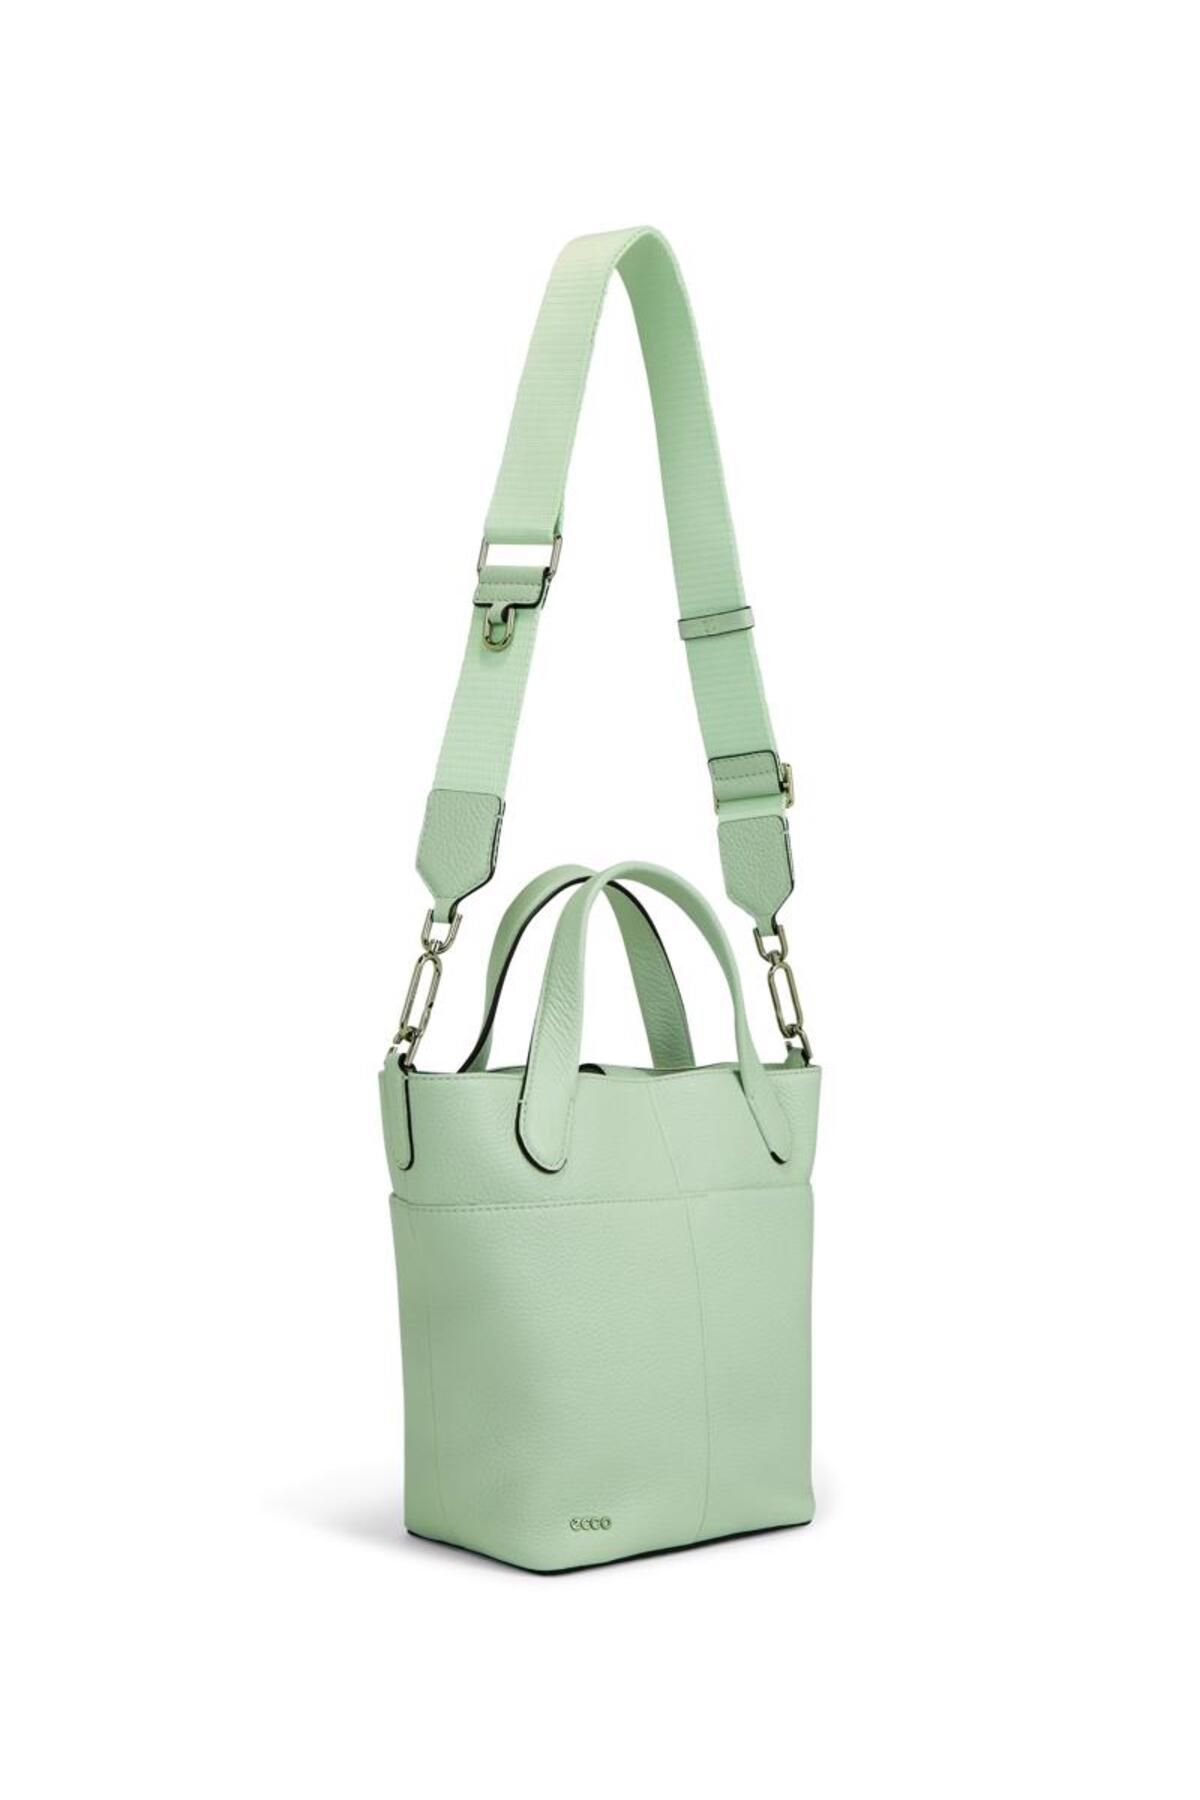 Ecco Tote S Pebbled Leather